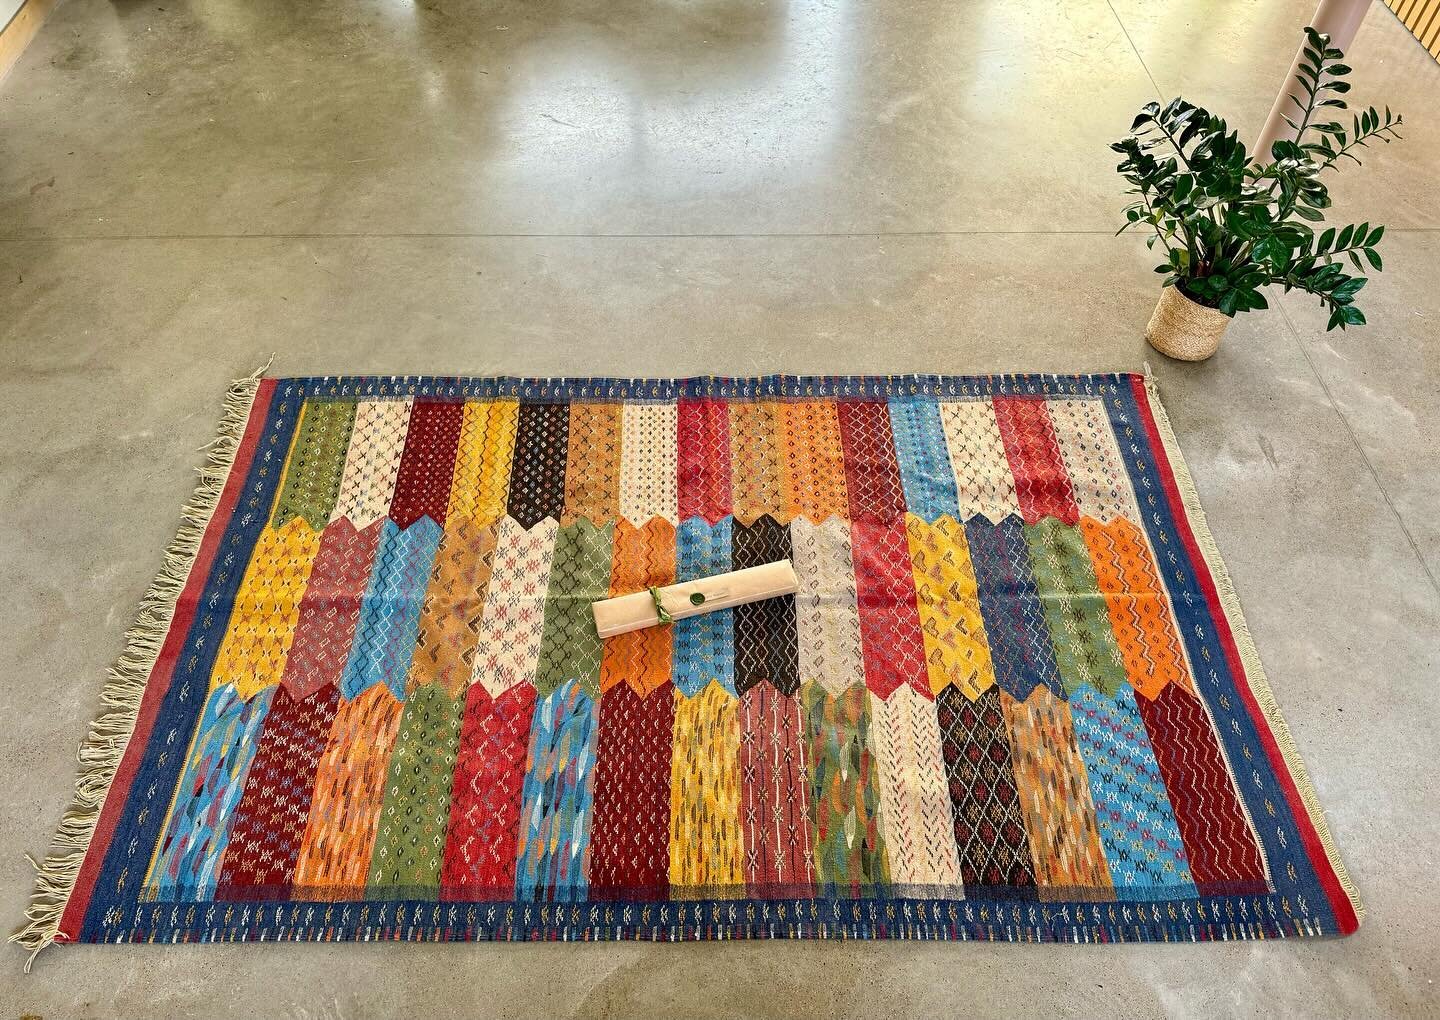 A very lovely delivery today from @joy.thorpe Take a look at her online for a selection of more kilim rugs amongst lots of other beautiful things 

#interiors #irishinteriors #concrete #morroccanrugs #kilim